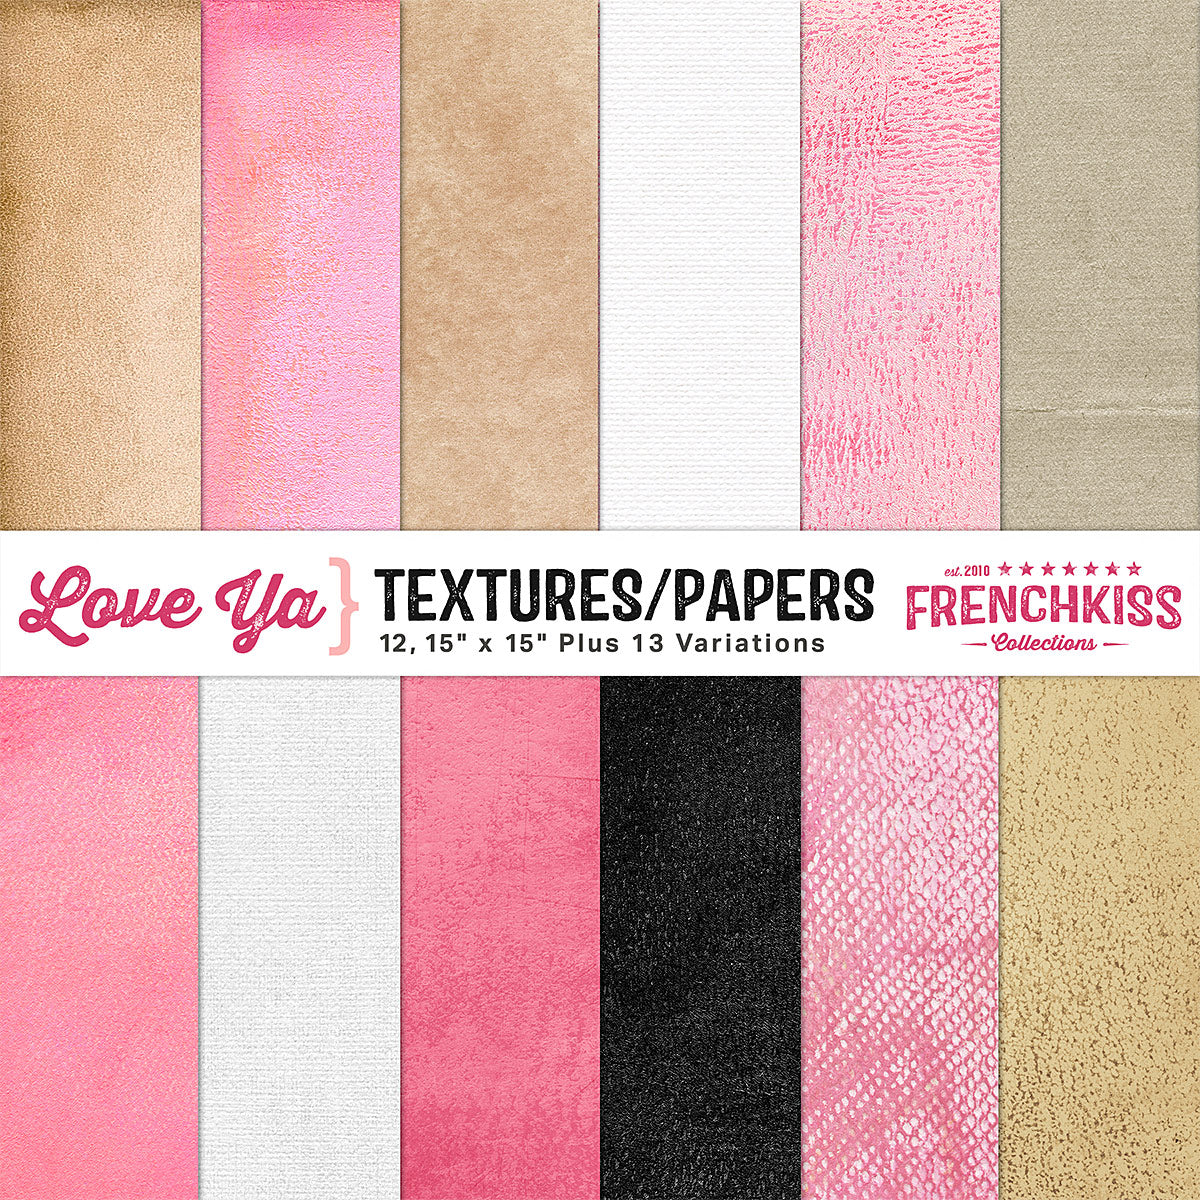 Love Ya Digital Textures and Papers for backgrounds, photography, scrapbooking, and design.